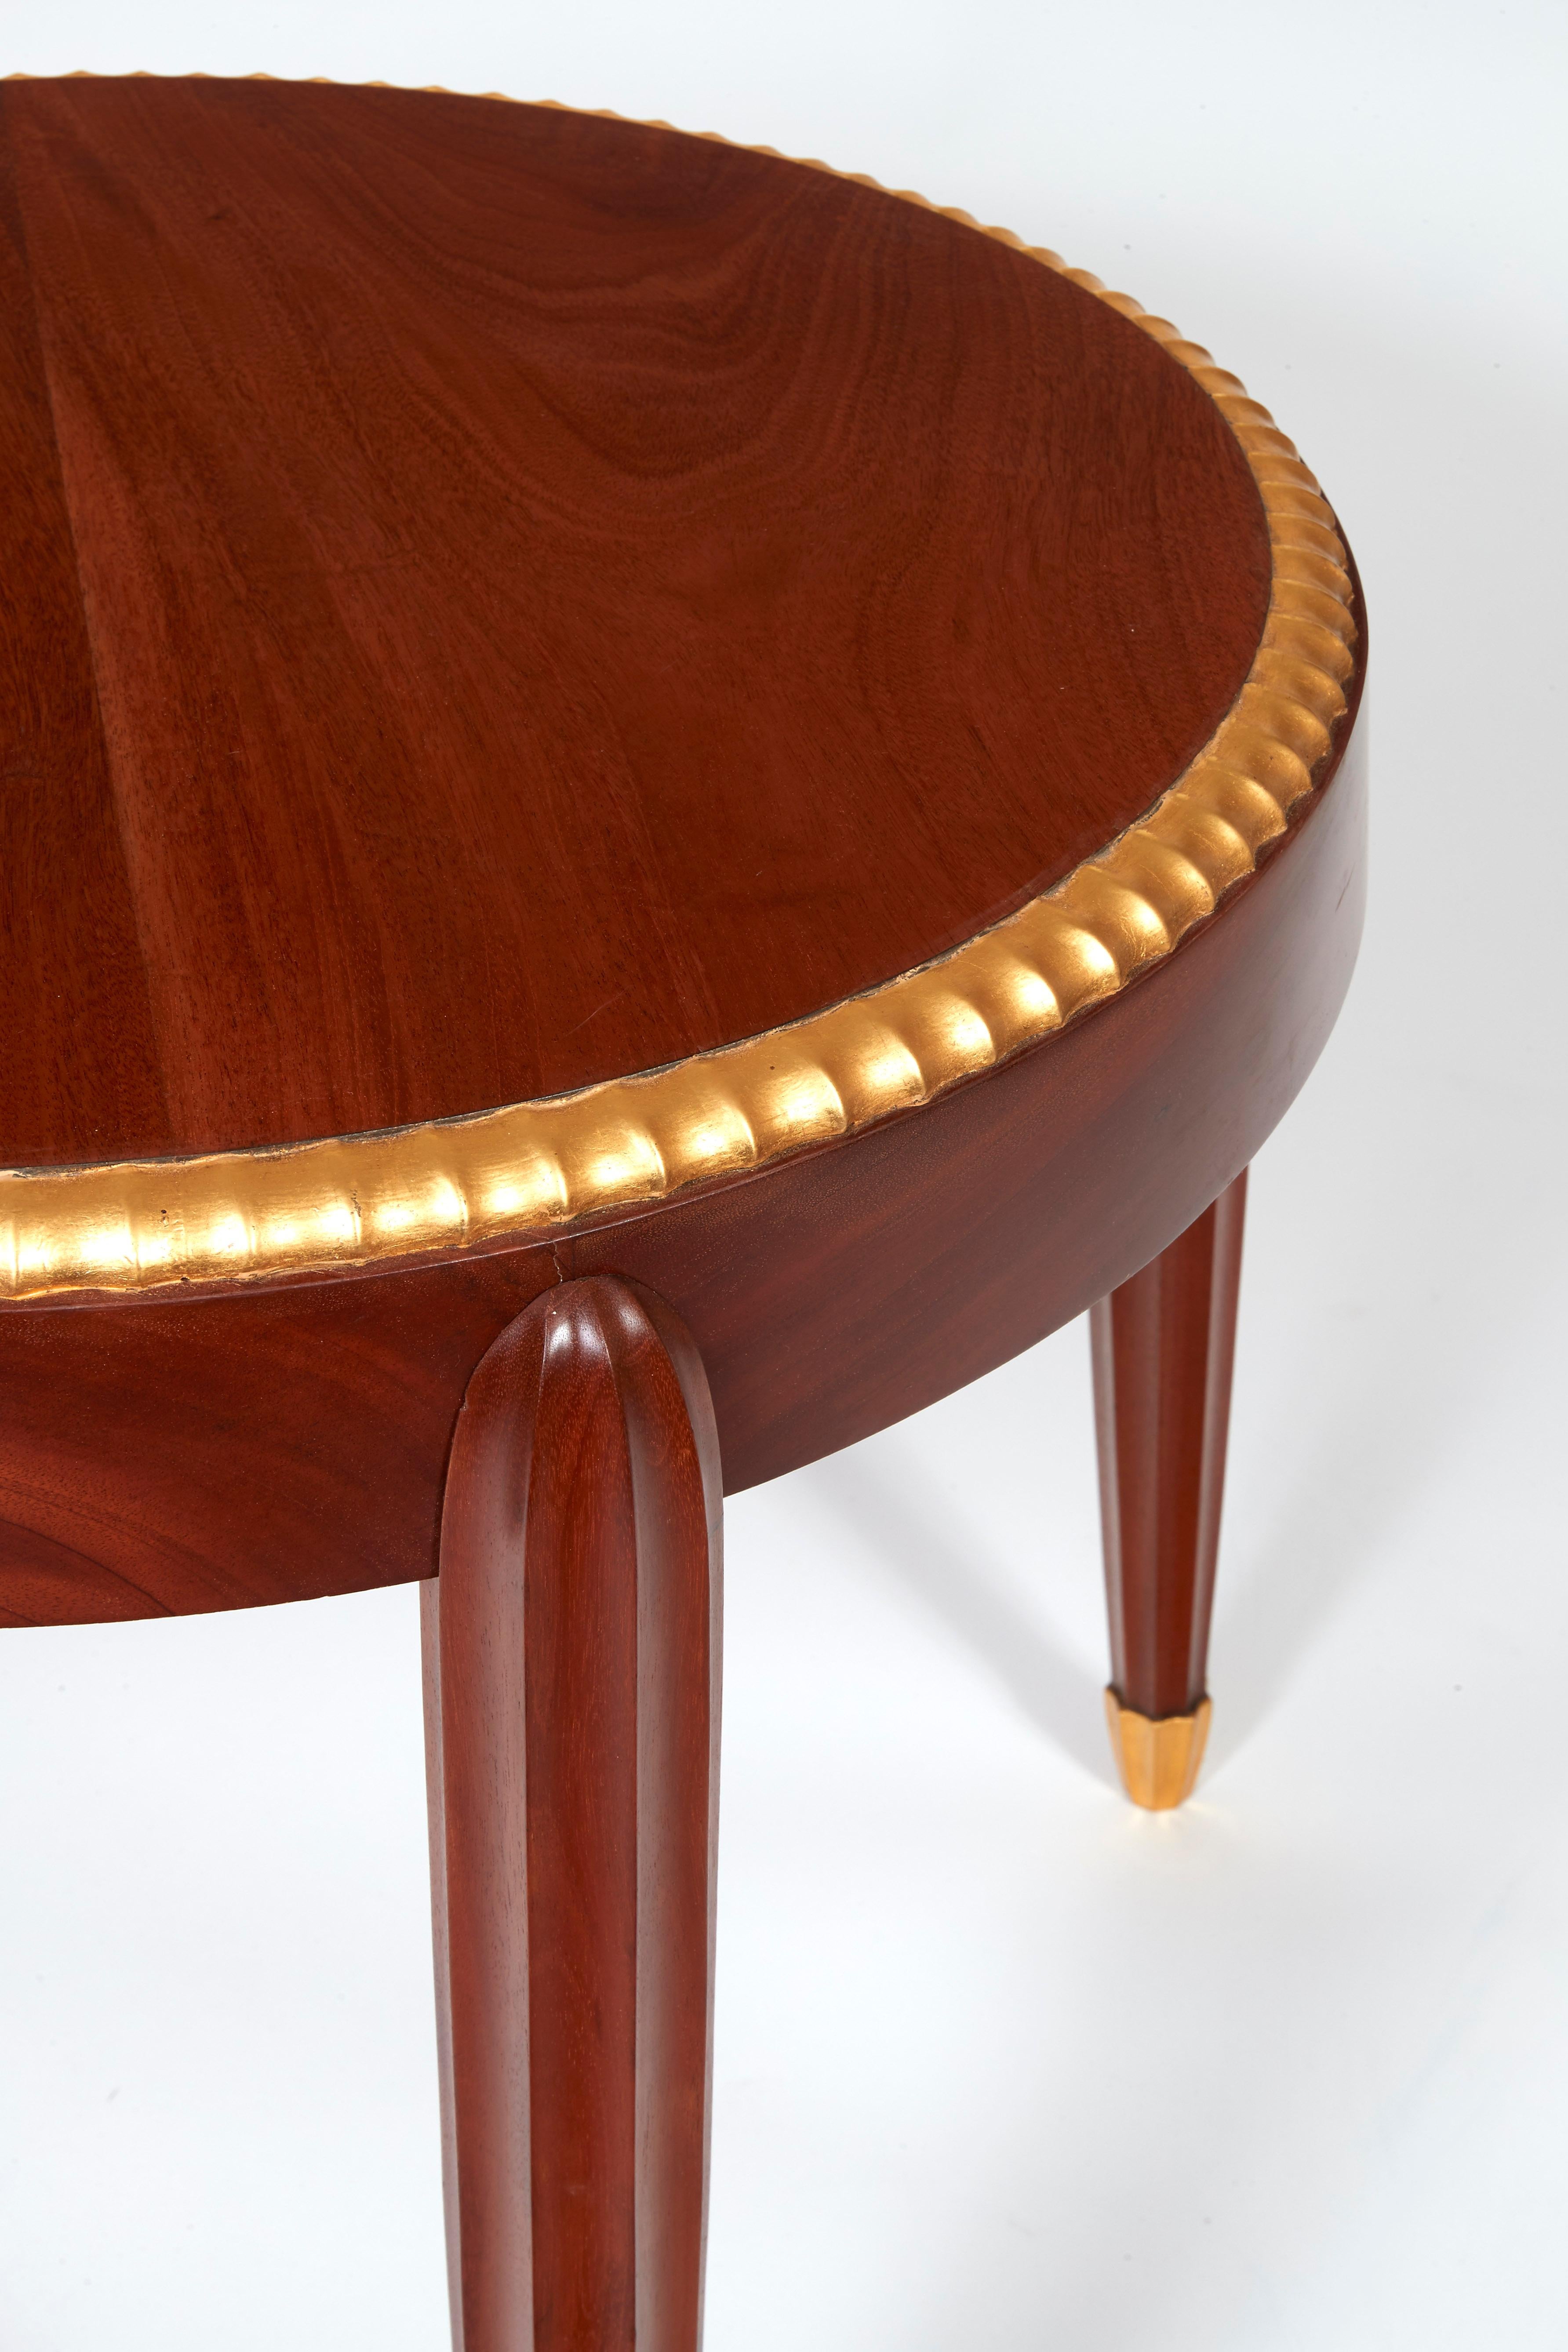 Pedestal table, circa 1925

Pedestal table in mahogany wood with a circular tray enhanced by a notched frieze. Four overlapped tapered notched legs with sheathed spinning top-shaped foot. Notched frieze and foot enhanced by golden